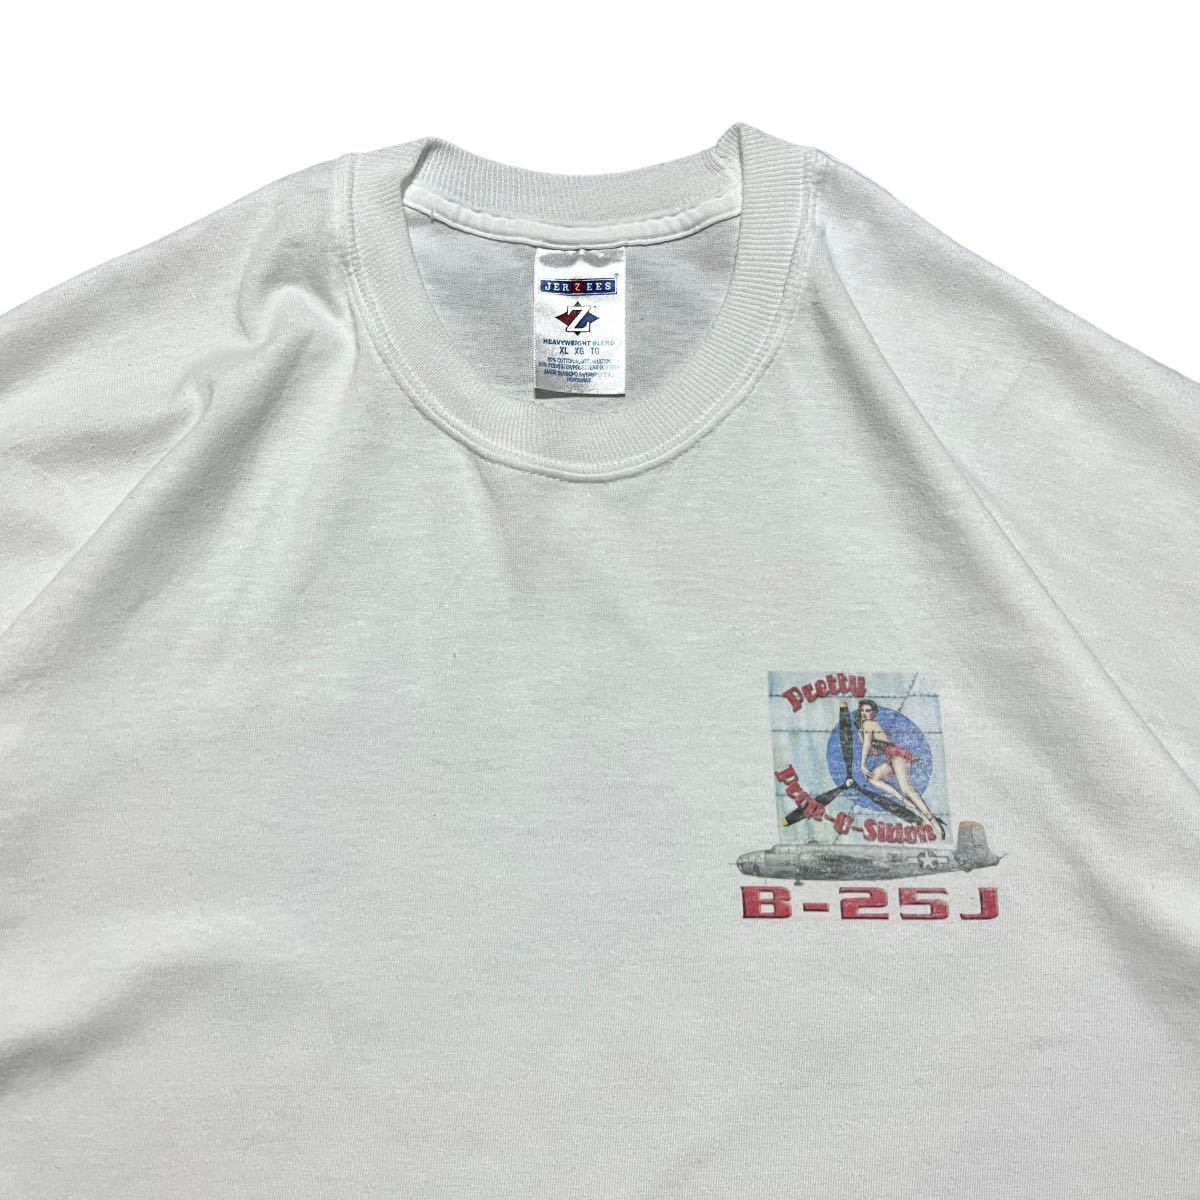 【90s B-25J 女性 プリント Tシャツ 】ビンテージ ヴィンテージ 古着 90s 80s 70s 60s 50s 40s USA製 Y2K ストリート 着用 Tee